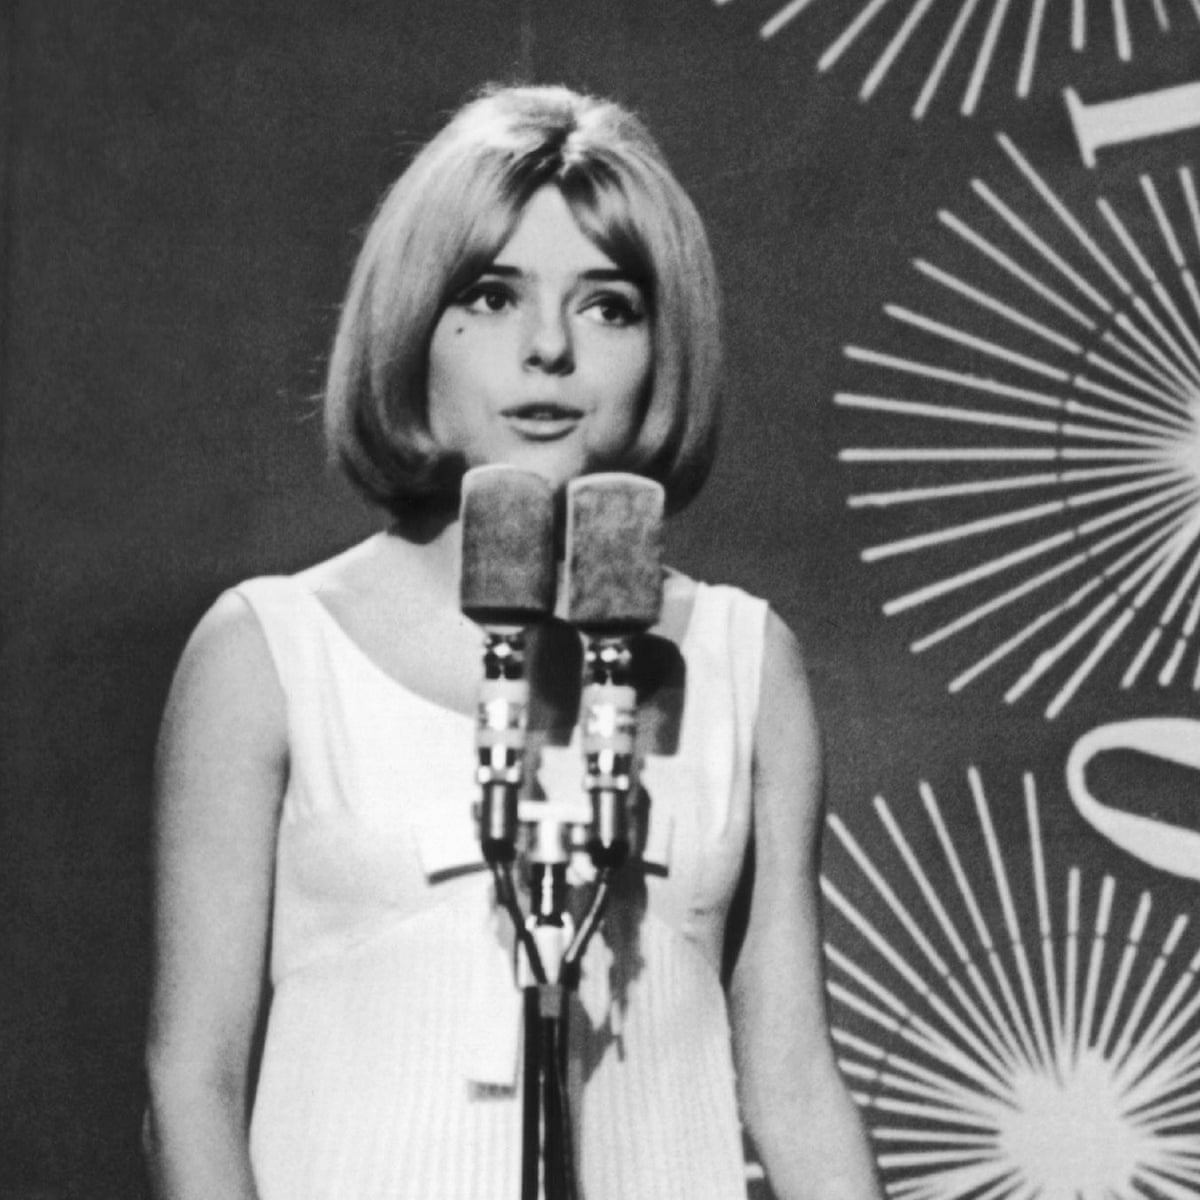 France Gall obituary, Pop and rock